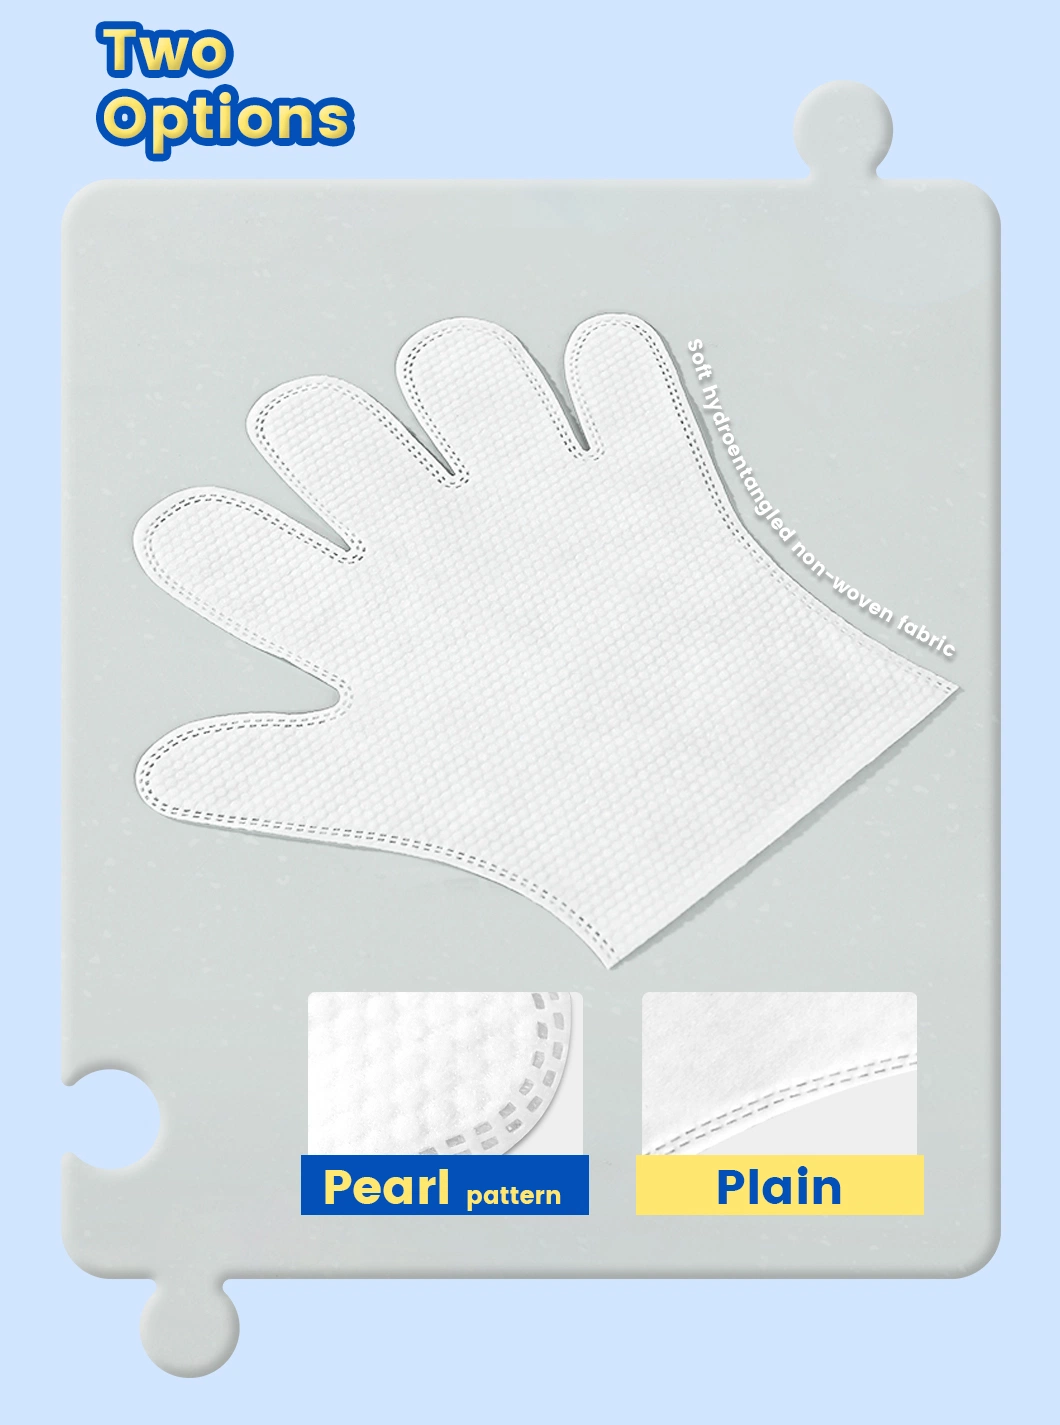 Pet Glove Wipes for Dogs and Cats: Anti-Bacterial, Deodorizing, Non-Washable